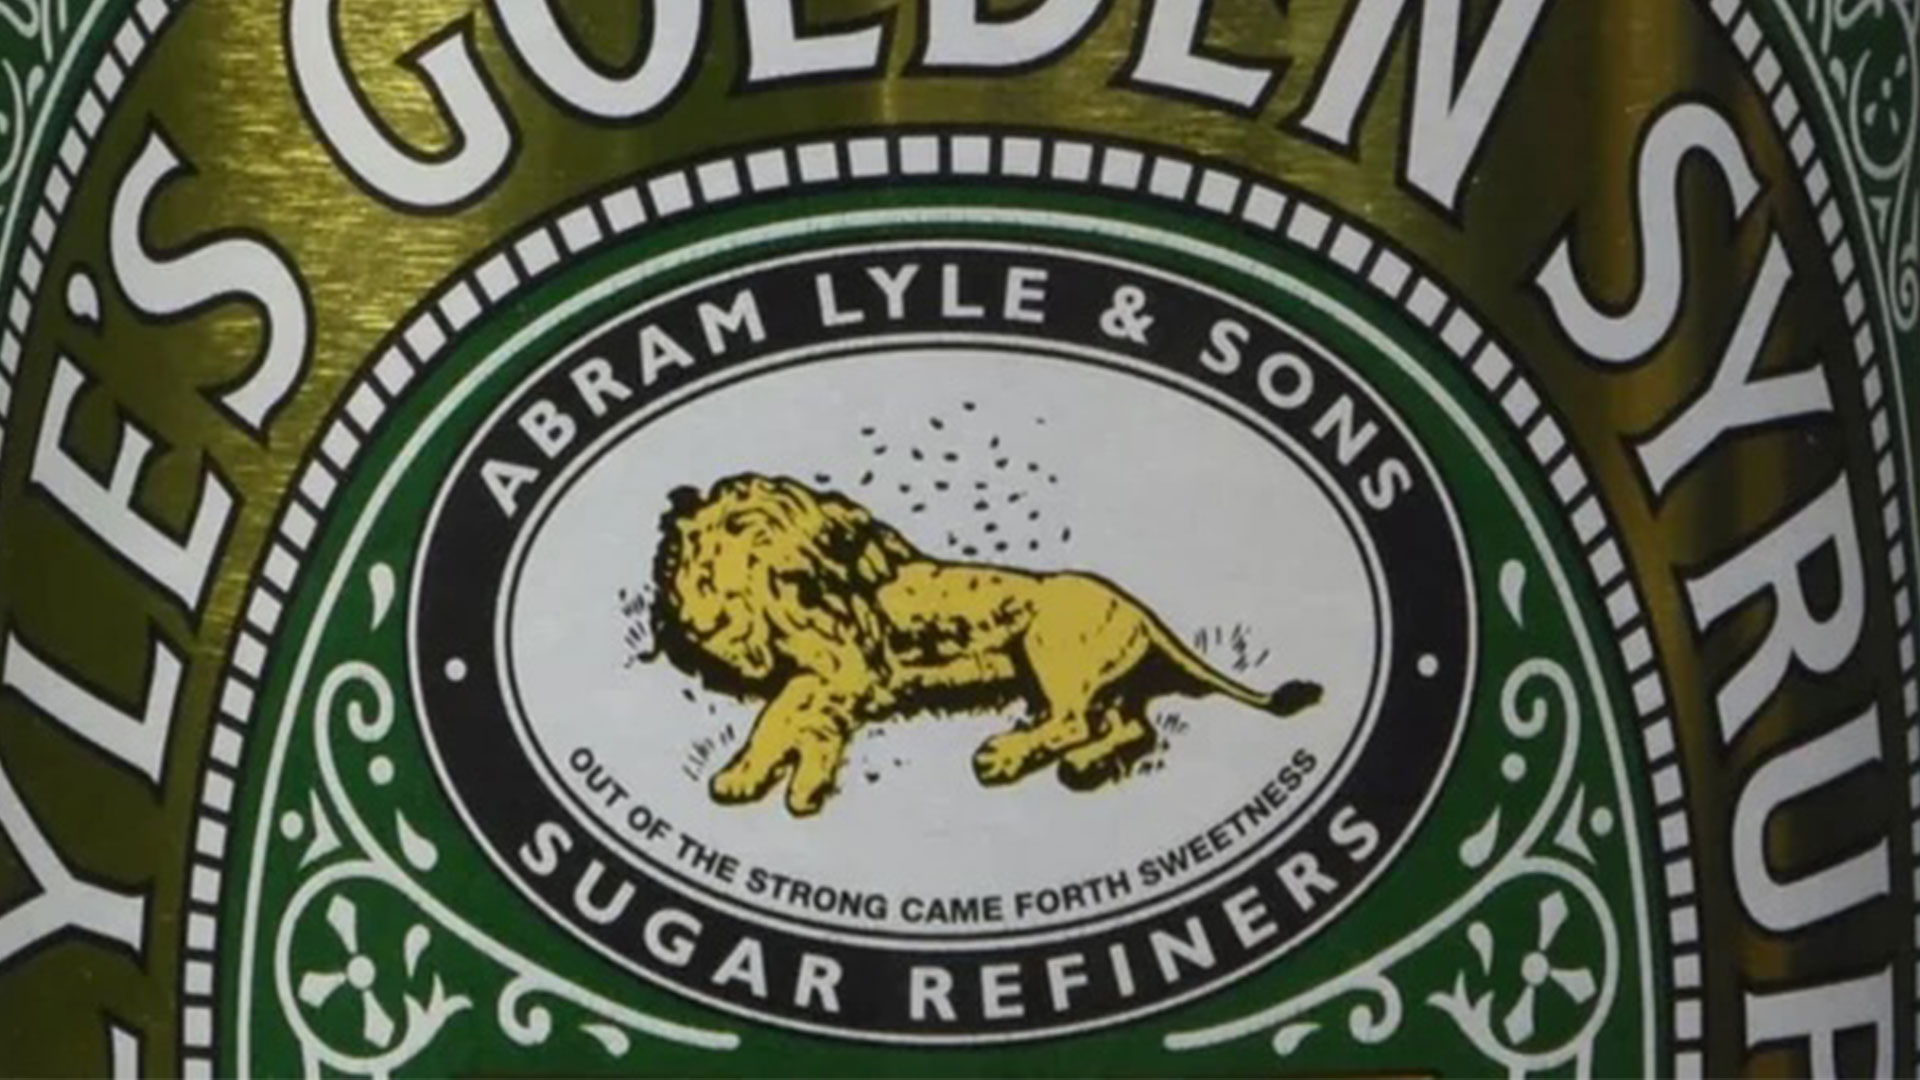 Lyle’s Golden Syrup has had a rebrand, losing the famous Bible-based logo featuring a lion and a swarm of bees. But what’s the story behind the original logo? 